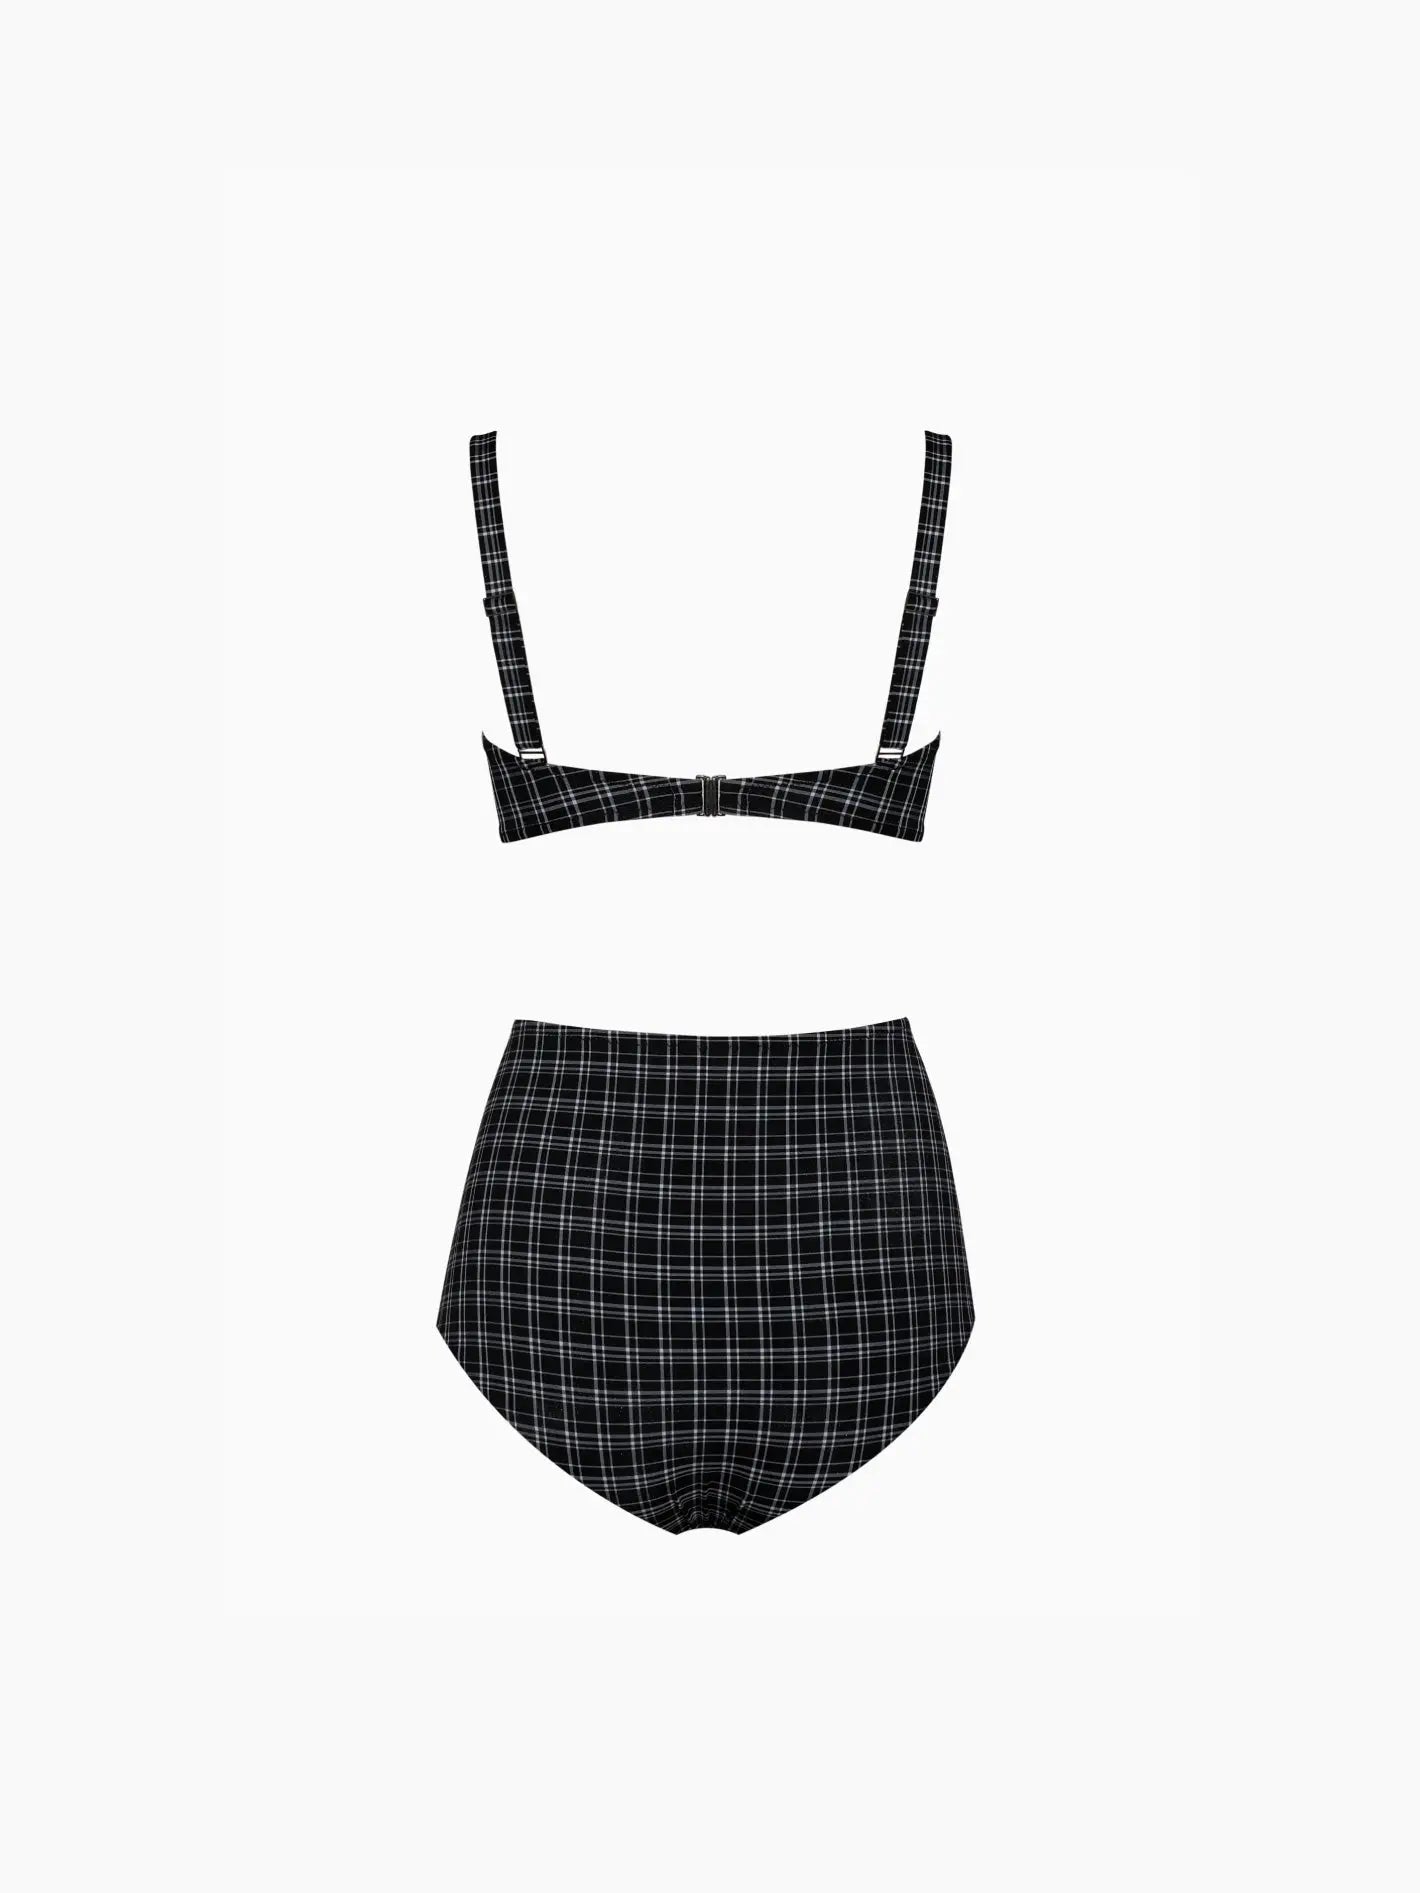 A black and white checkered two-piece swimsuit from Bassalstore in Barcelona, the Mila Bikini B&W by Pale, features a high-waisted bottom and a top with thin shoulder straps. The pattern consists of horizontal and vertical white lines forming a grid, displayed on a plain white background.